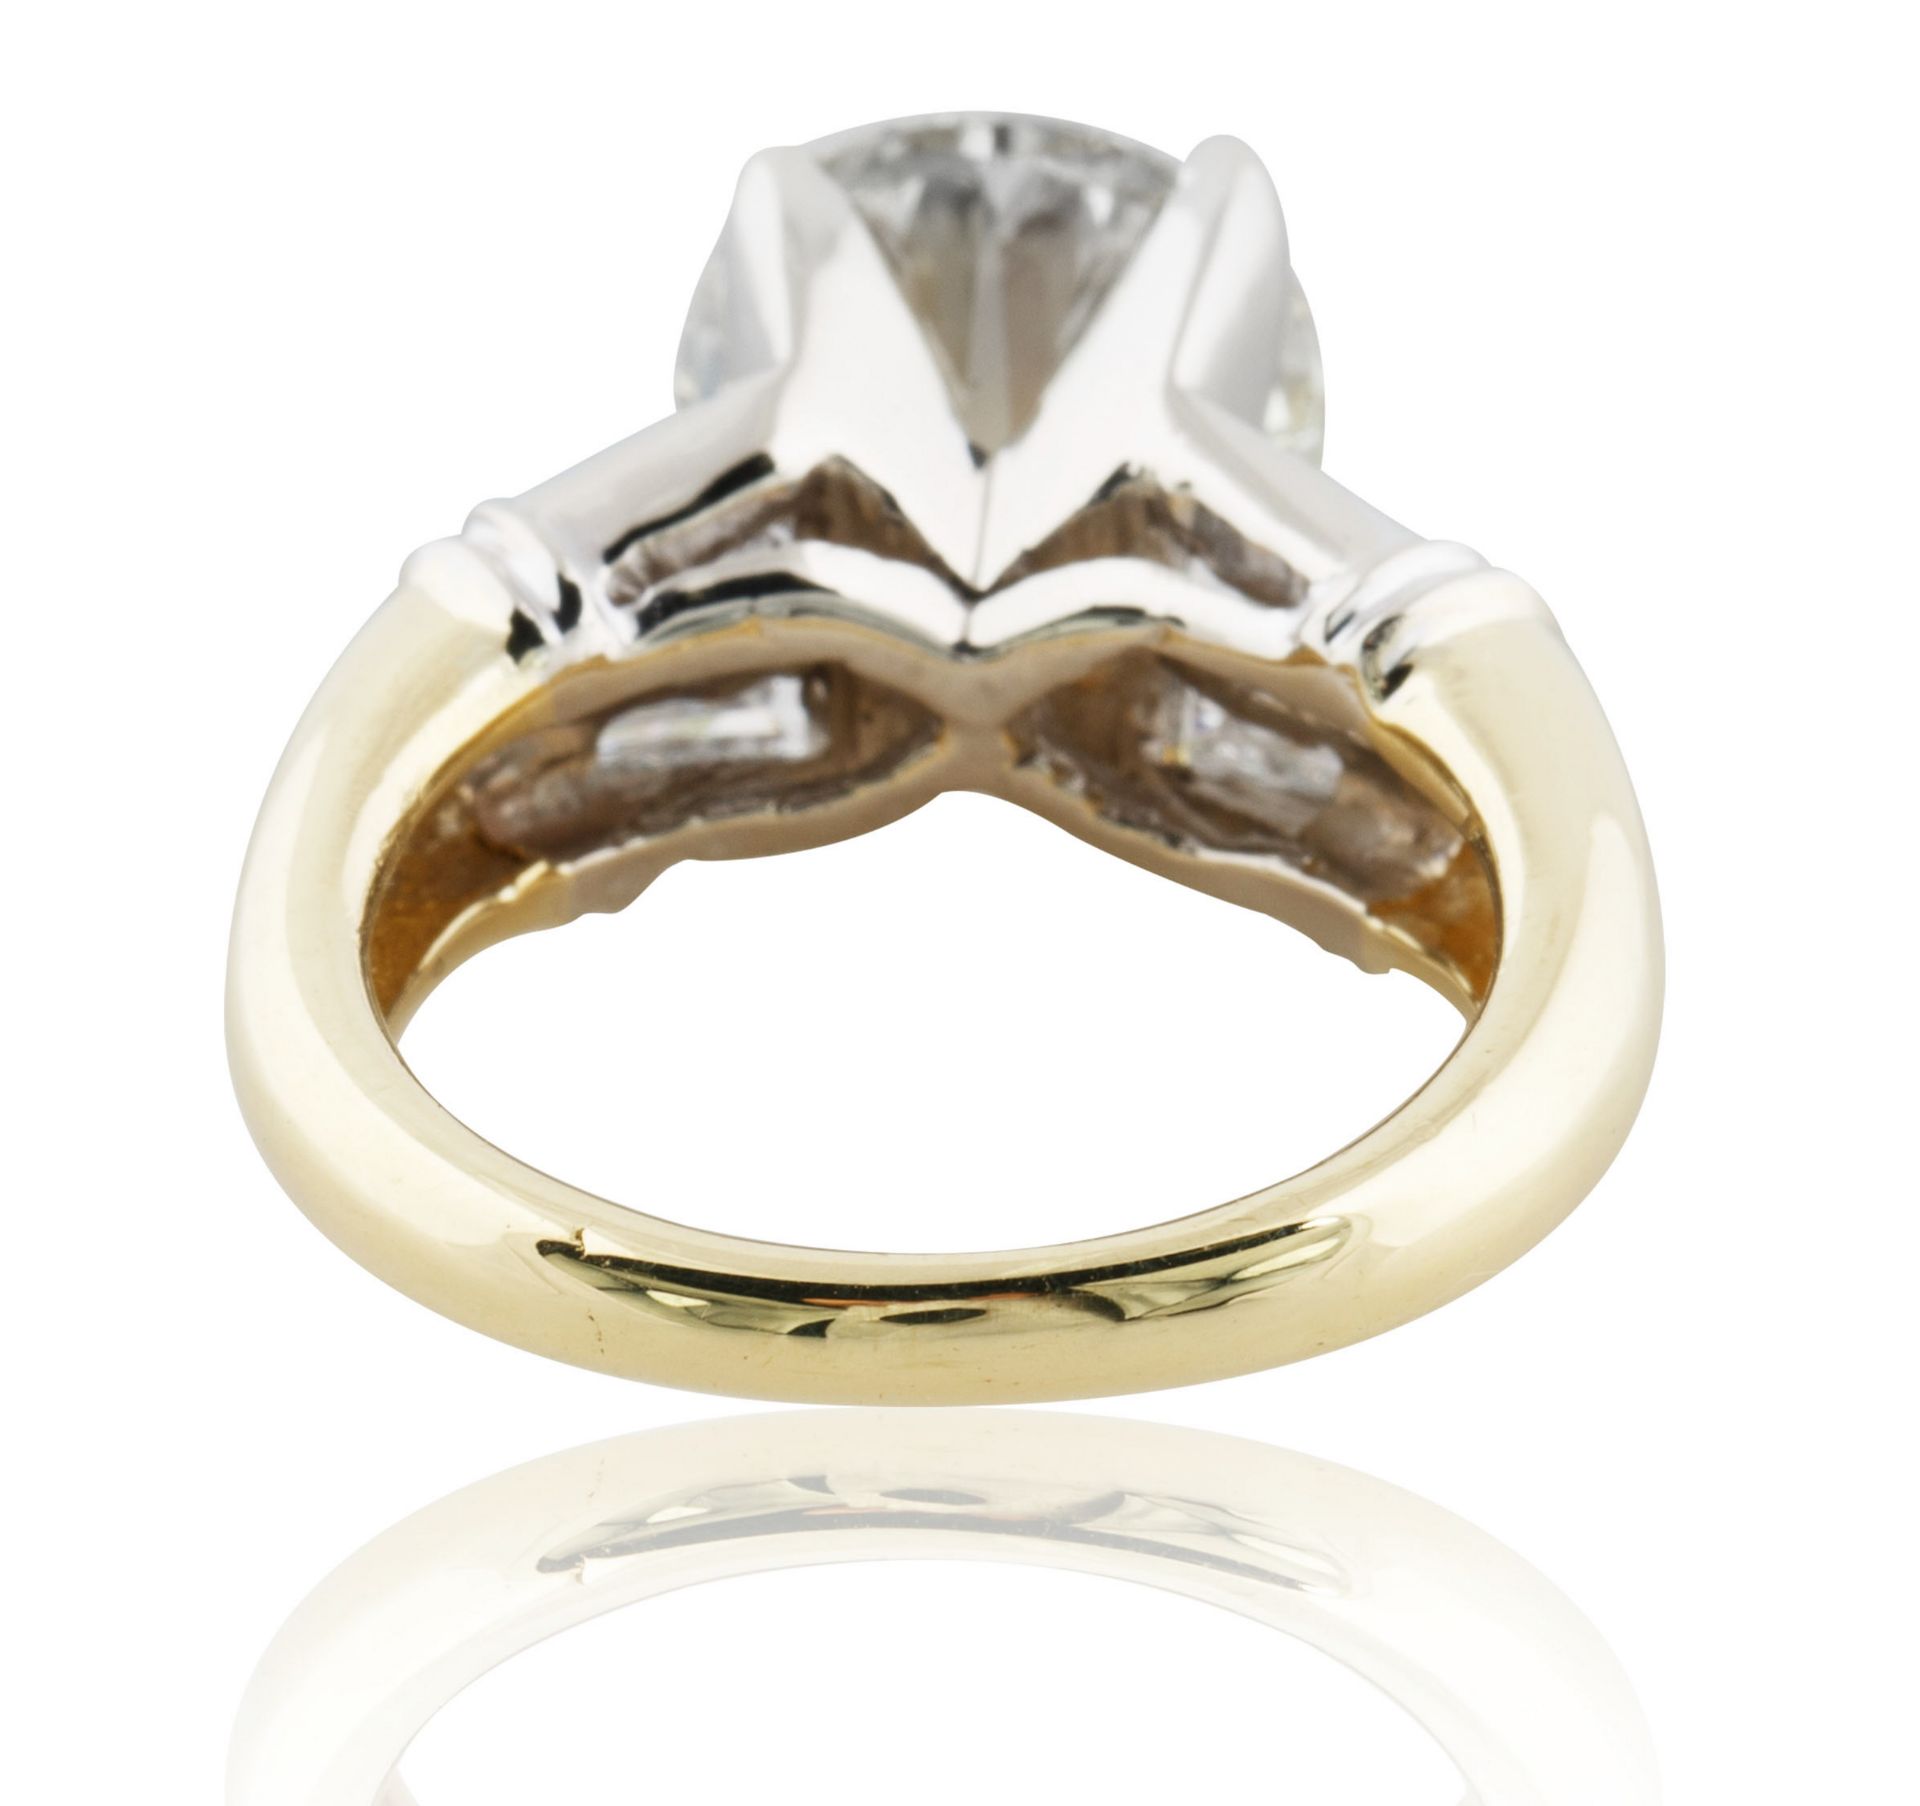 A 4.30 CT BRILLIANT ROUND CUT DIAMOND RING SET IN 18KT GOLD BAND - Image 3 of 7